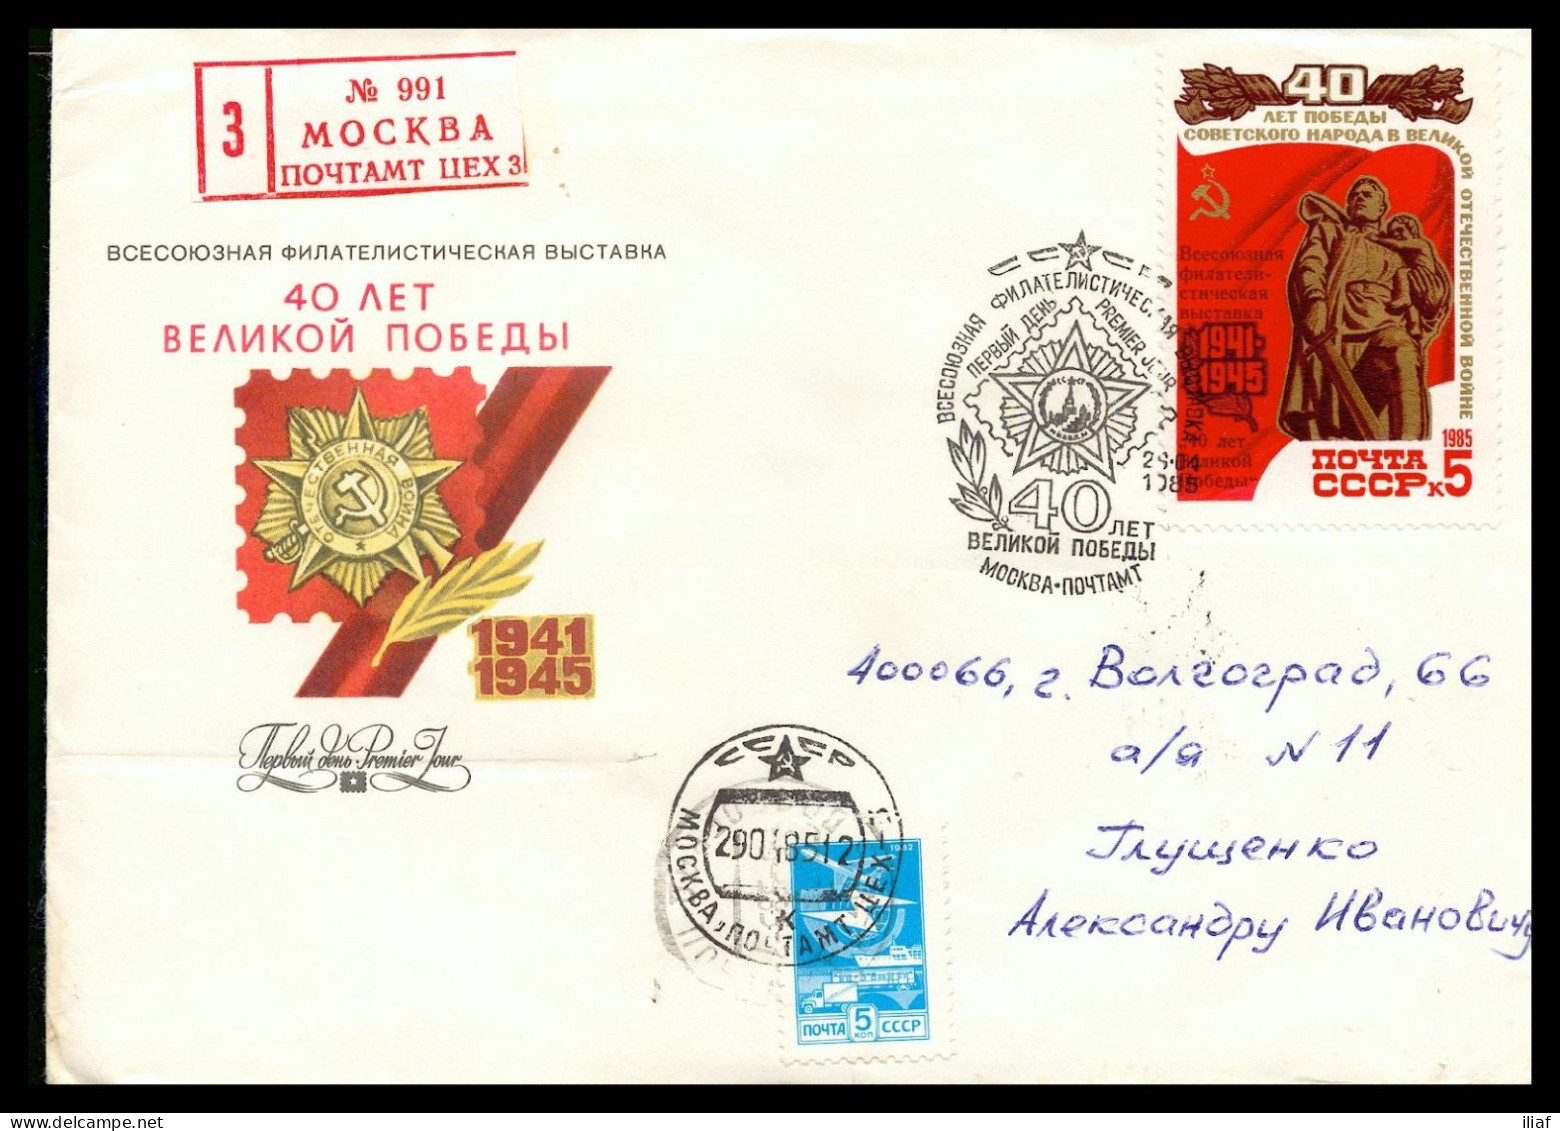 RUSSIA & USSR All Union Philatelic Exhibition 40 Years Victory In II WW FDC Envelope With FDC Cancellation Special Over - Expositions Philatéliques